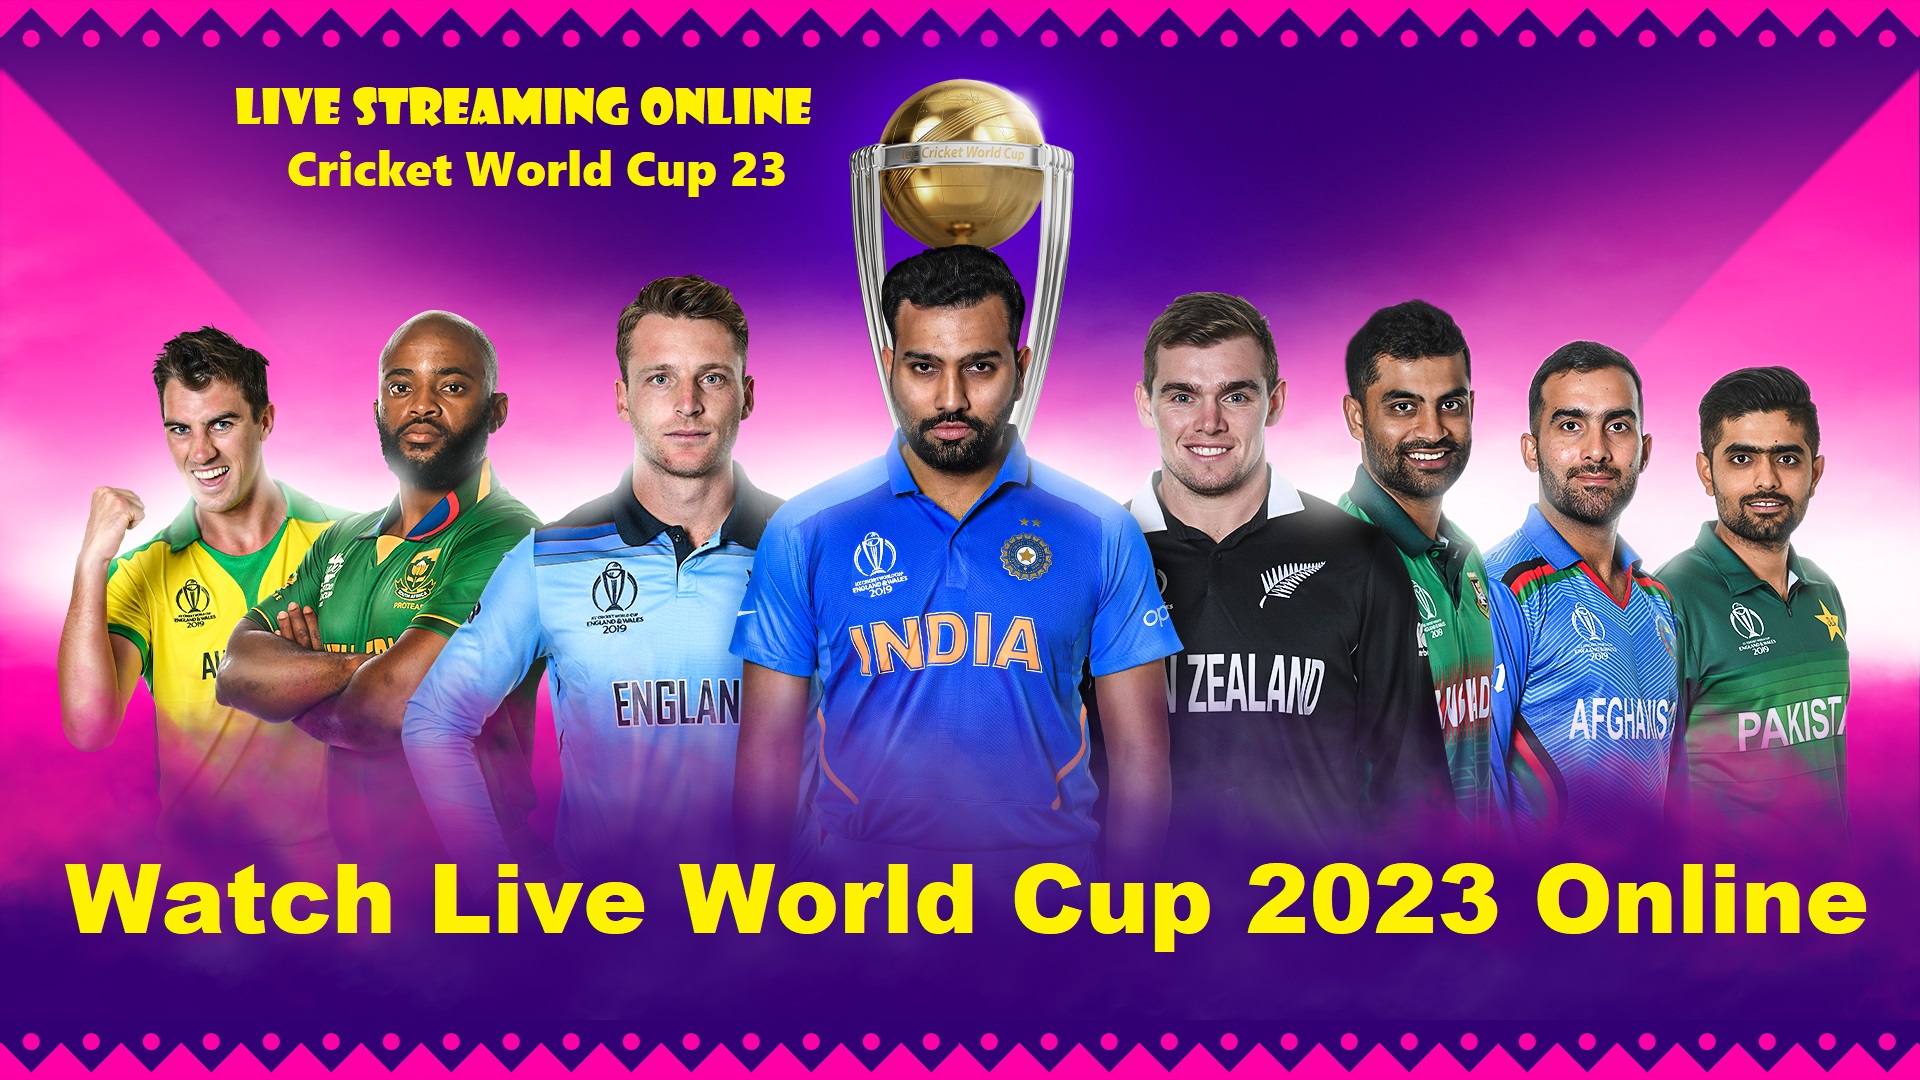 Watch Live cricket world cup 2023 live streaming online hd Video